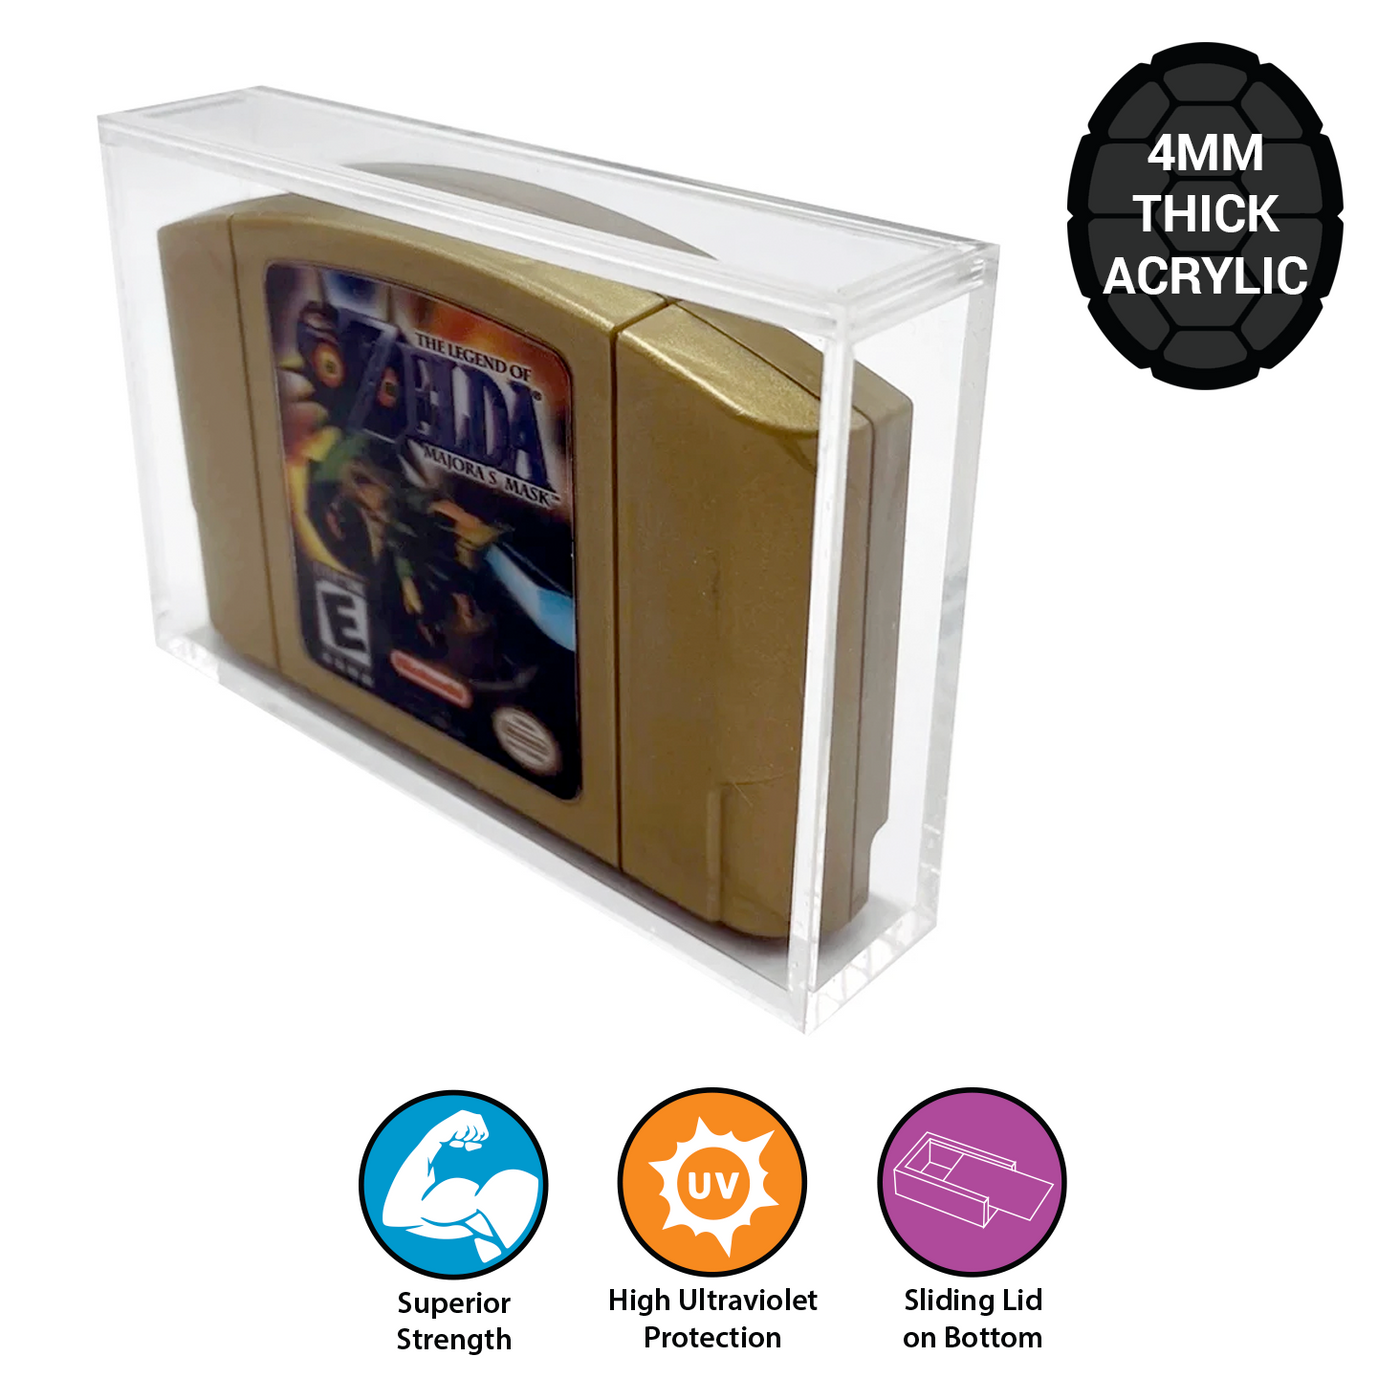 Acrylic Case for N64 Video Game Cartridge 4mm thick, UV & Slide Bottom on The Pop Protector Guide by Display Geek